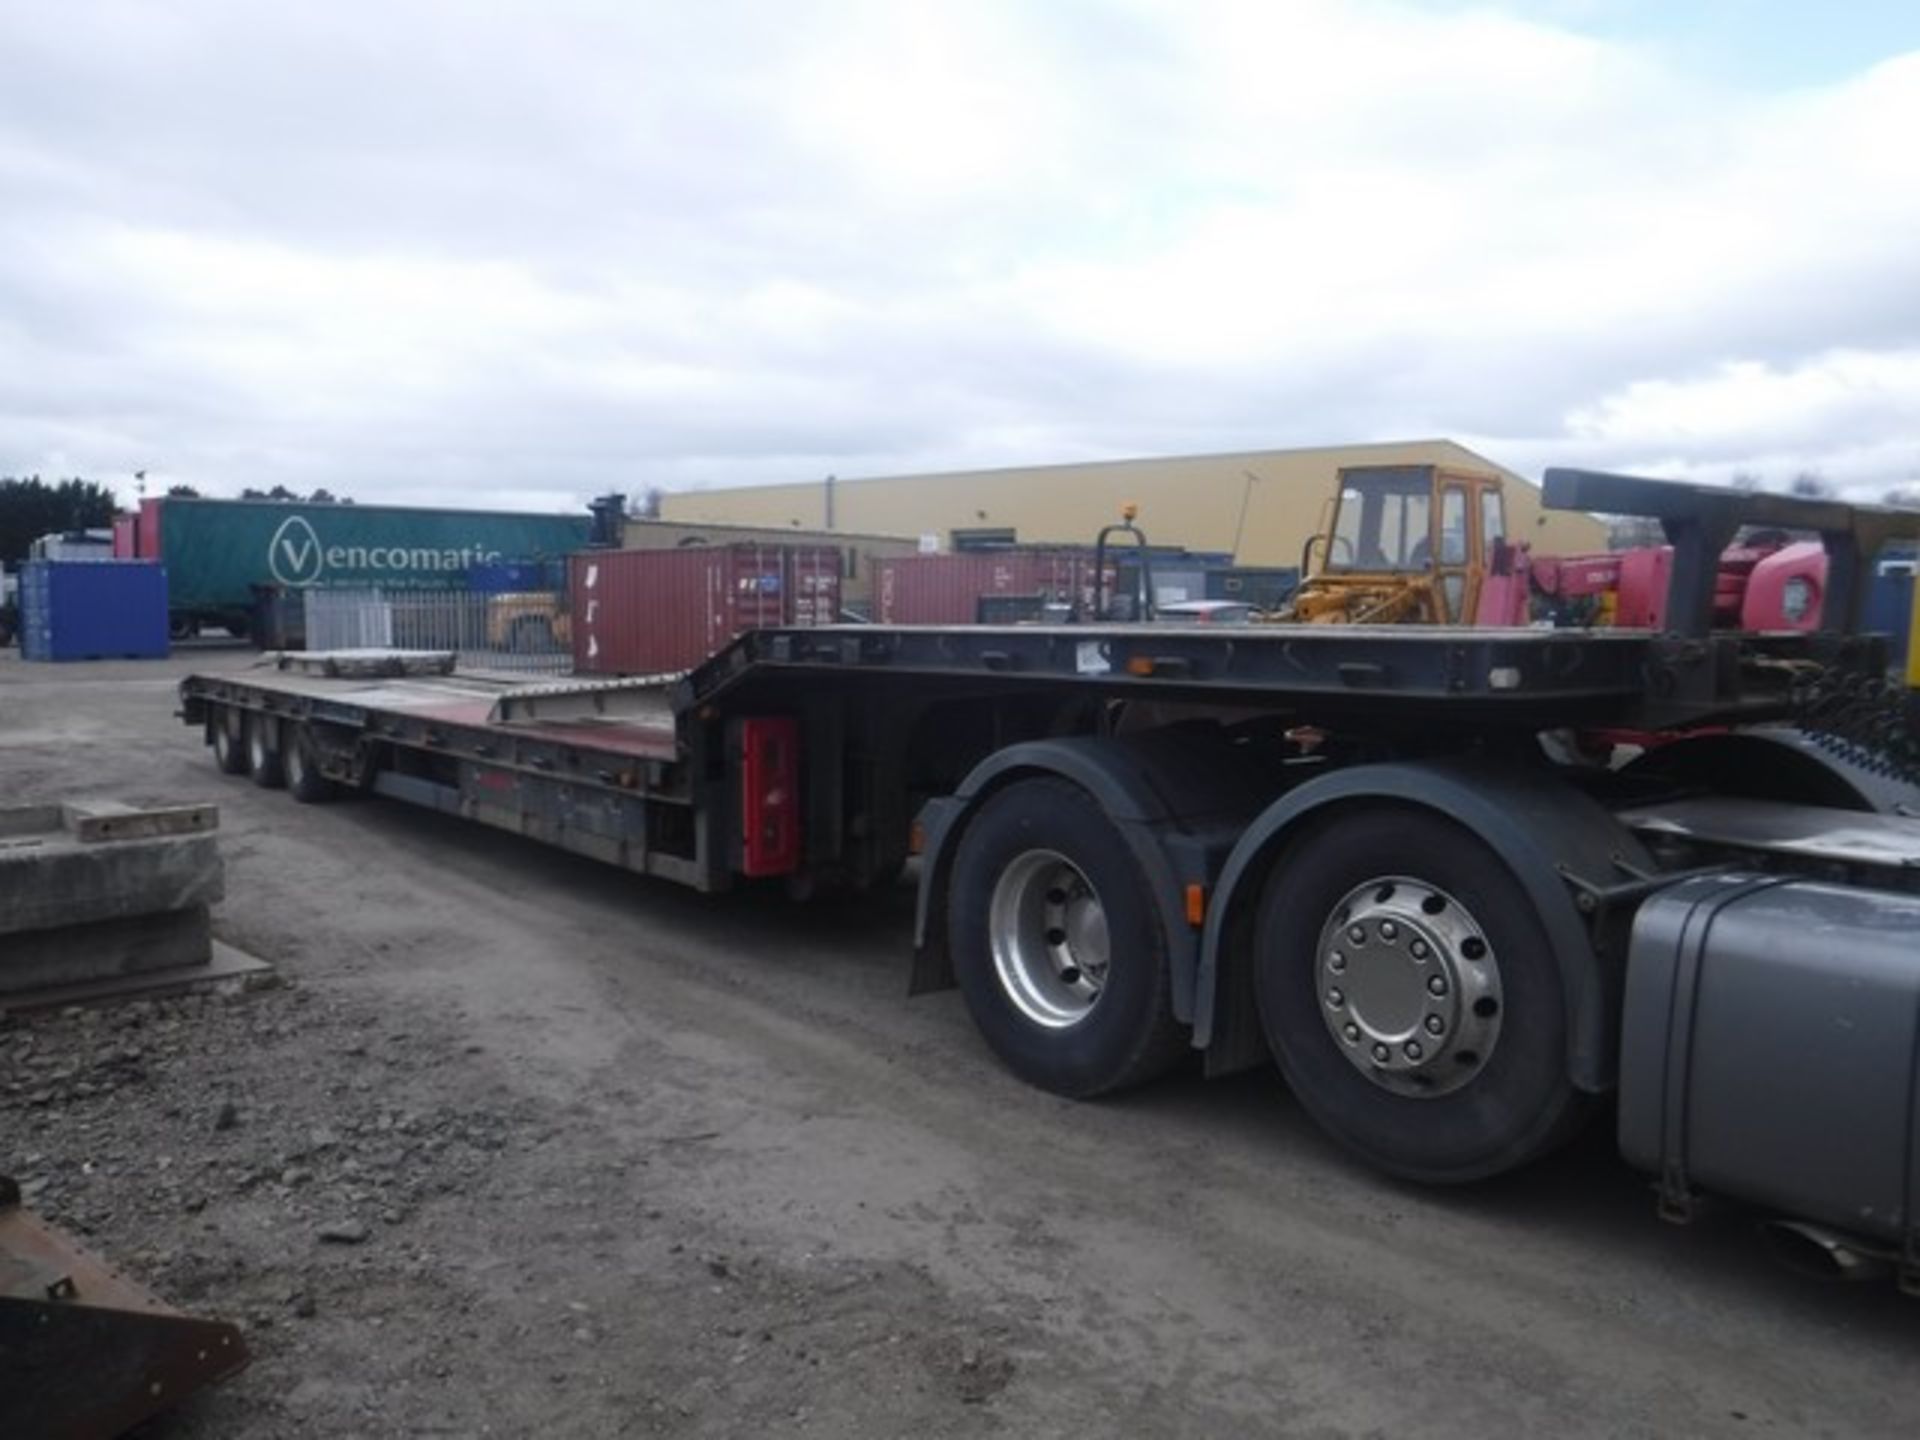 2007 S&amp;M Trailer, Length 49Ft , 3 axles on air rear axle lift c/w out riggers,combine - Image 7 of 8